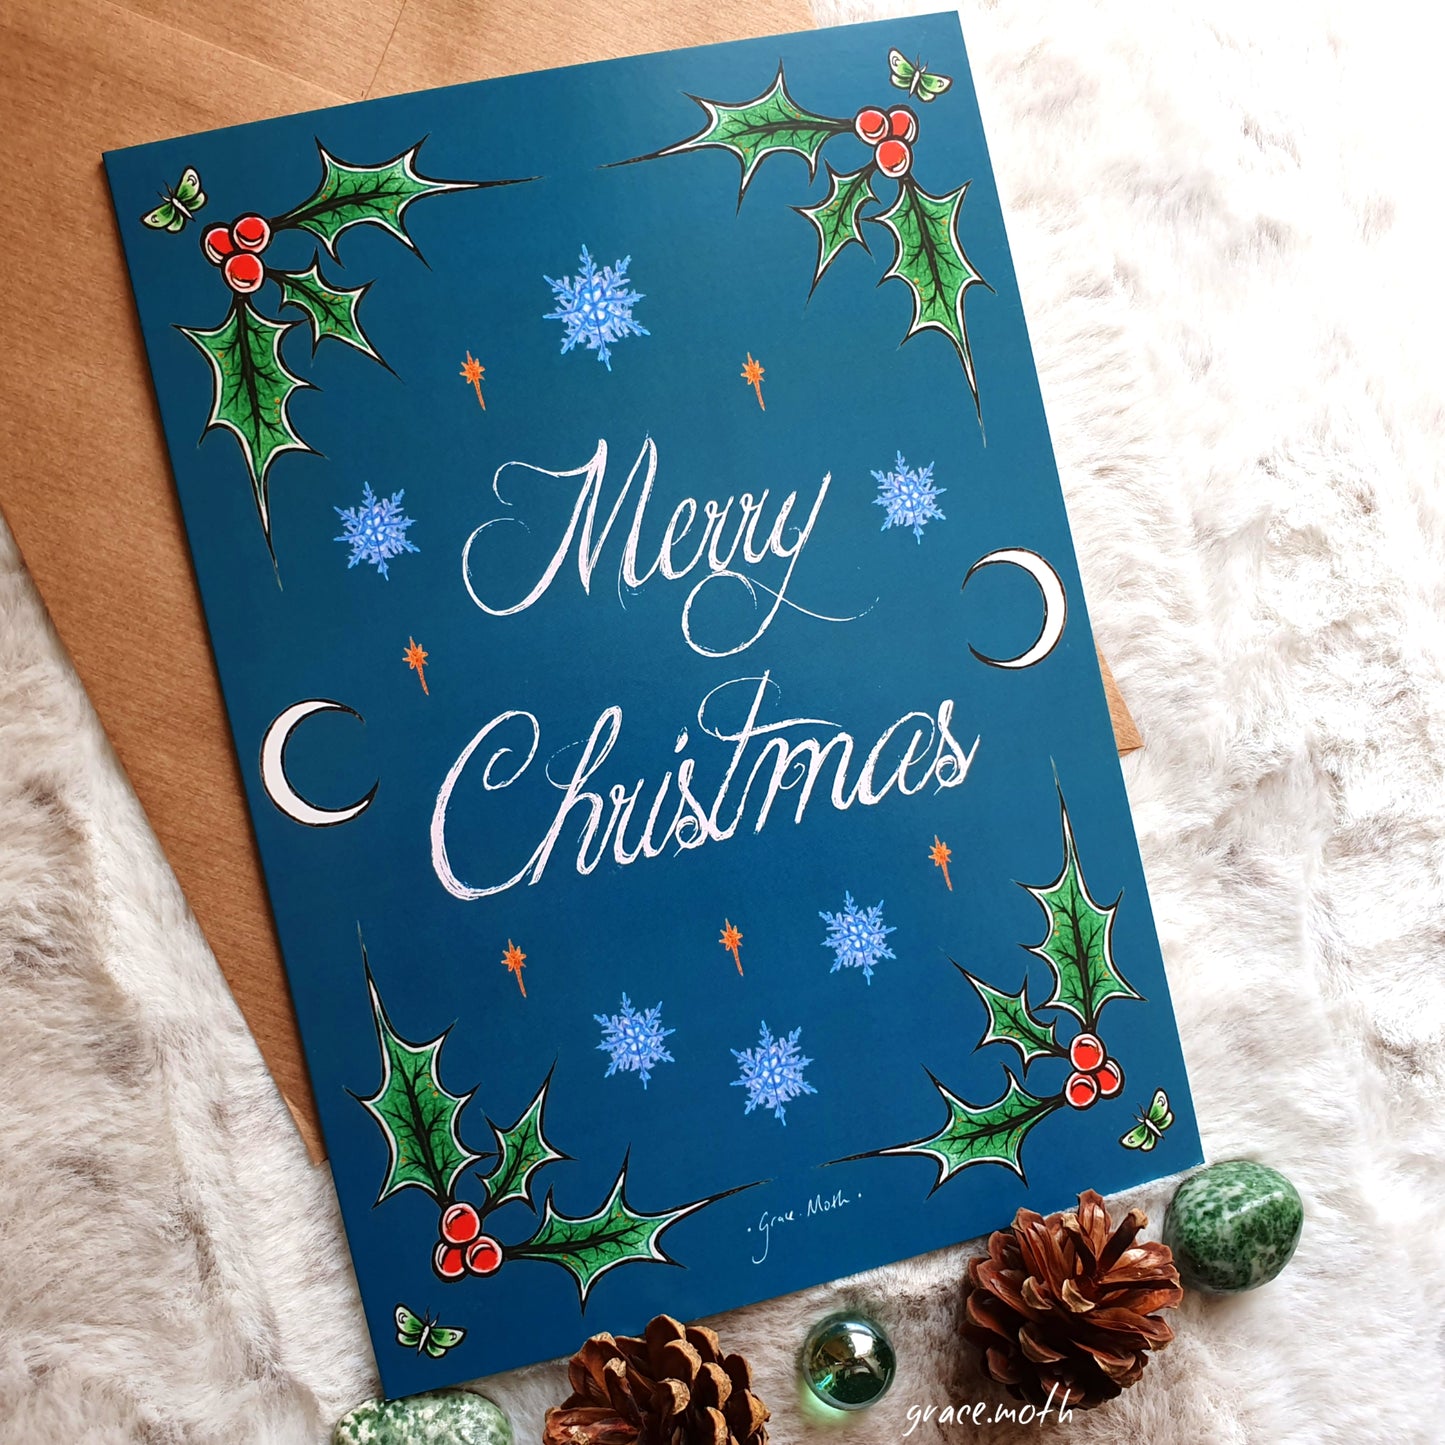 Merry Christmas - A5 greeting card by Grace Moth - 5.8 x 8.3